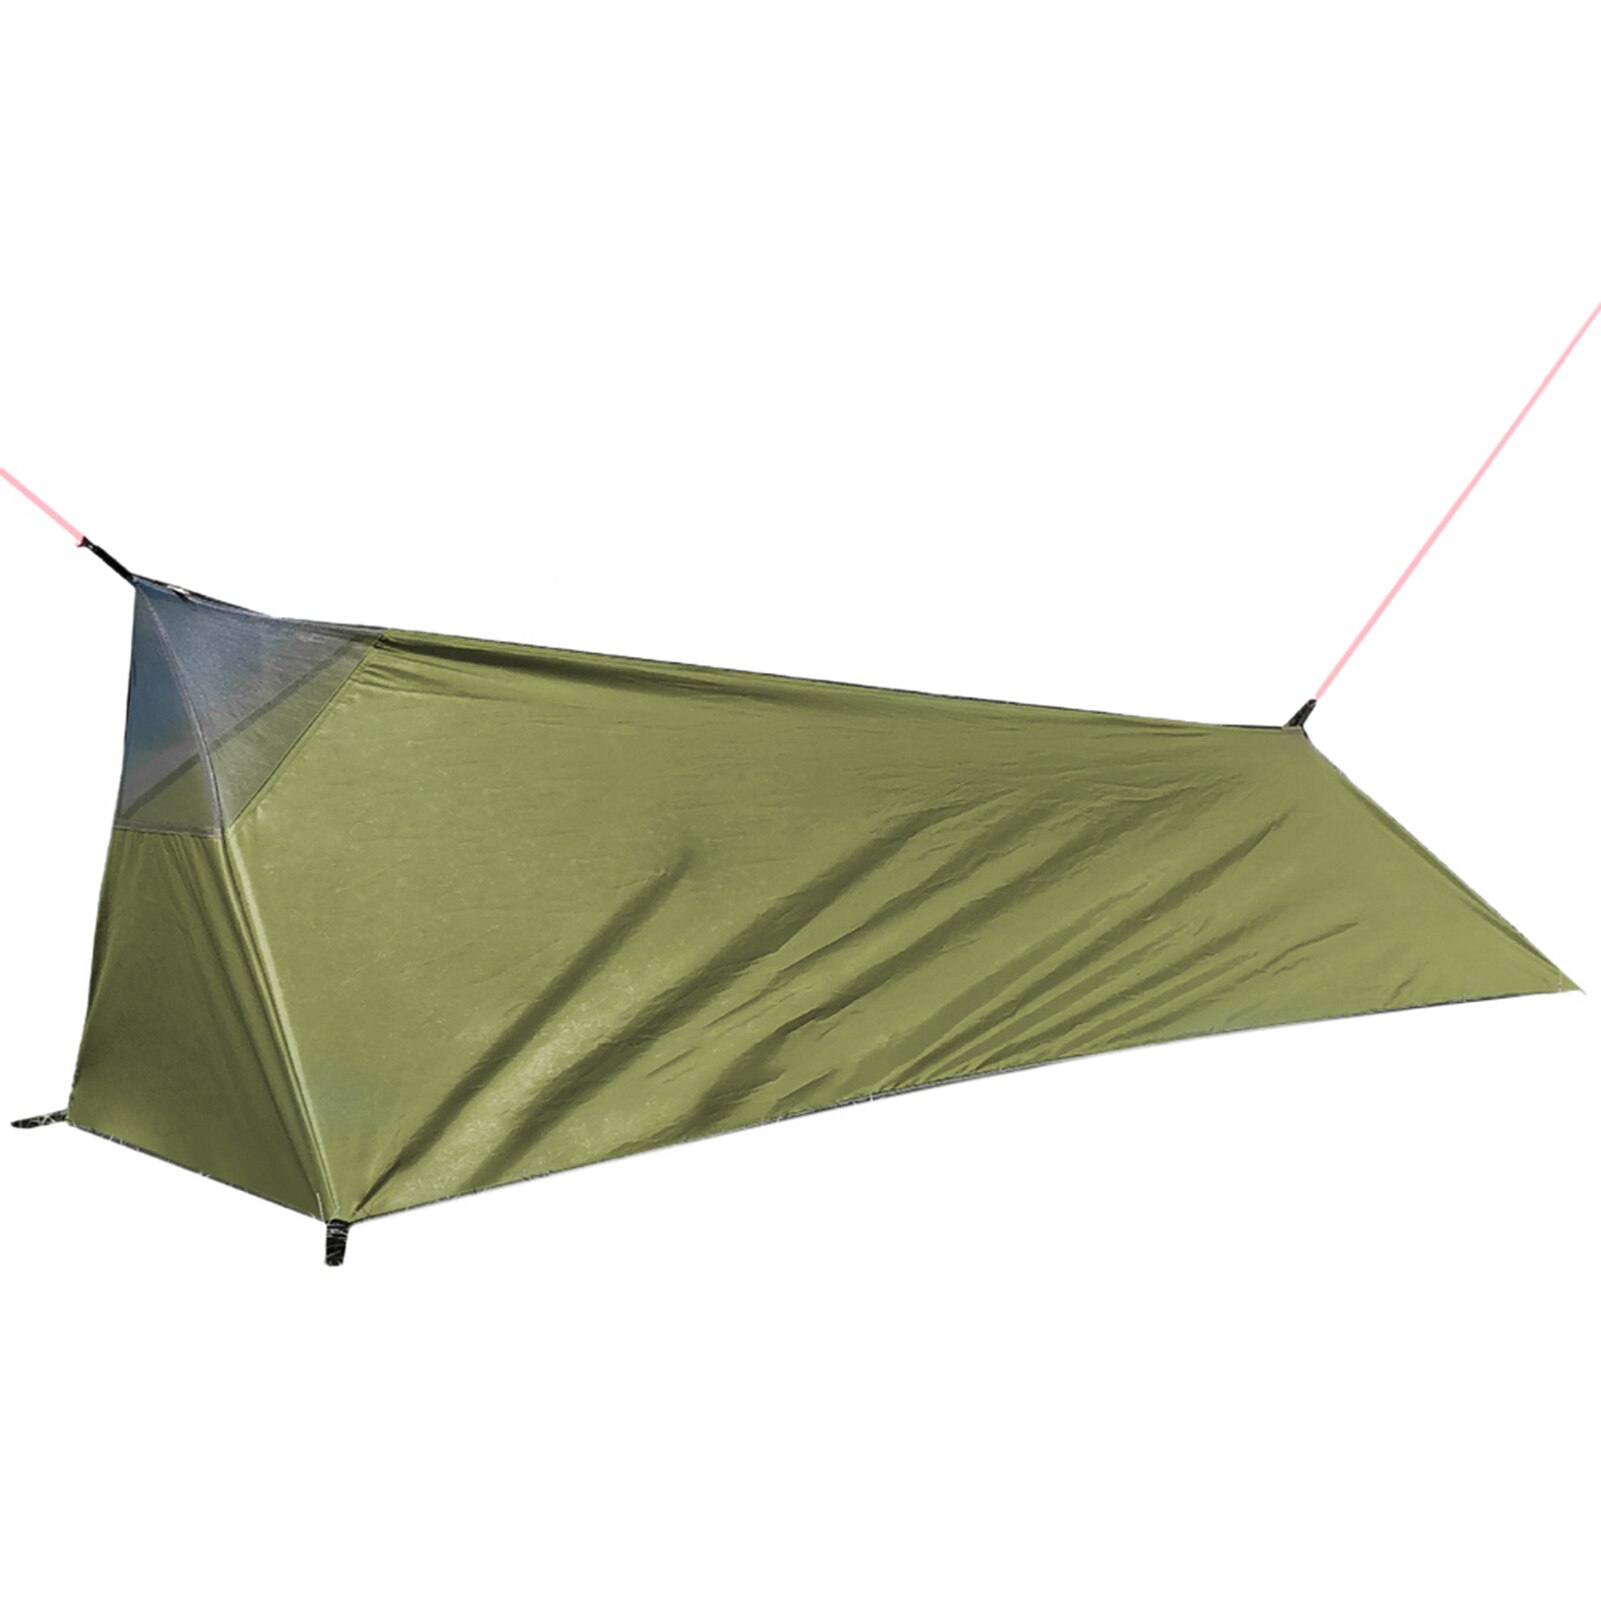 A Tower Ultralight Tent 1 Person Camping Tent Portable Canopy Hiking Mountaining Backpacking Waterproof Single Tent: Green